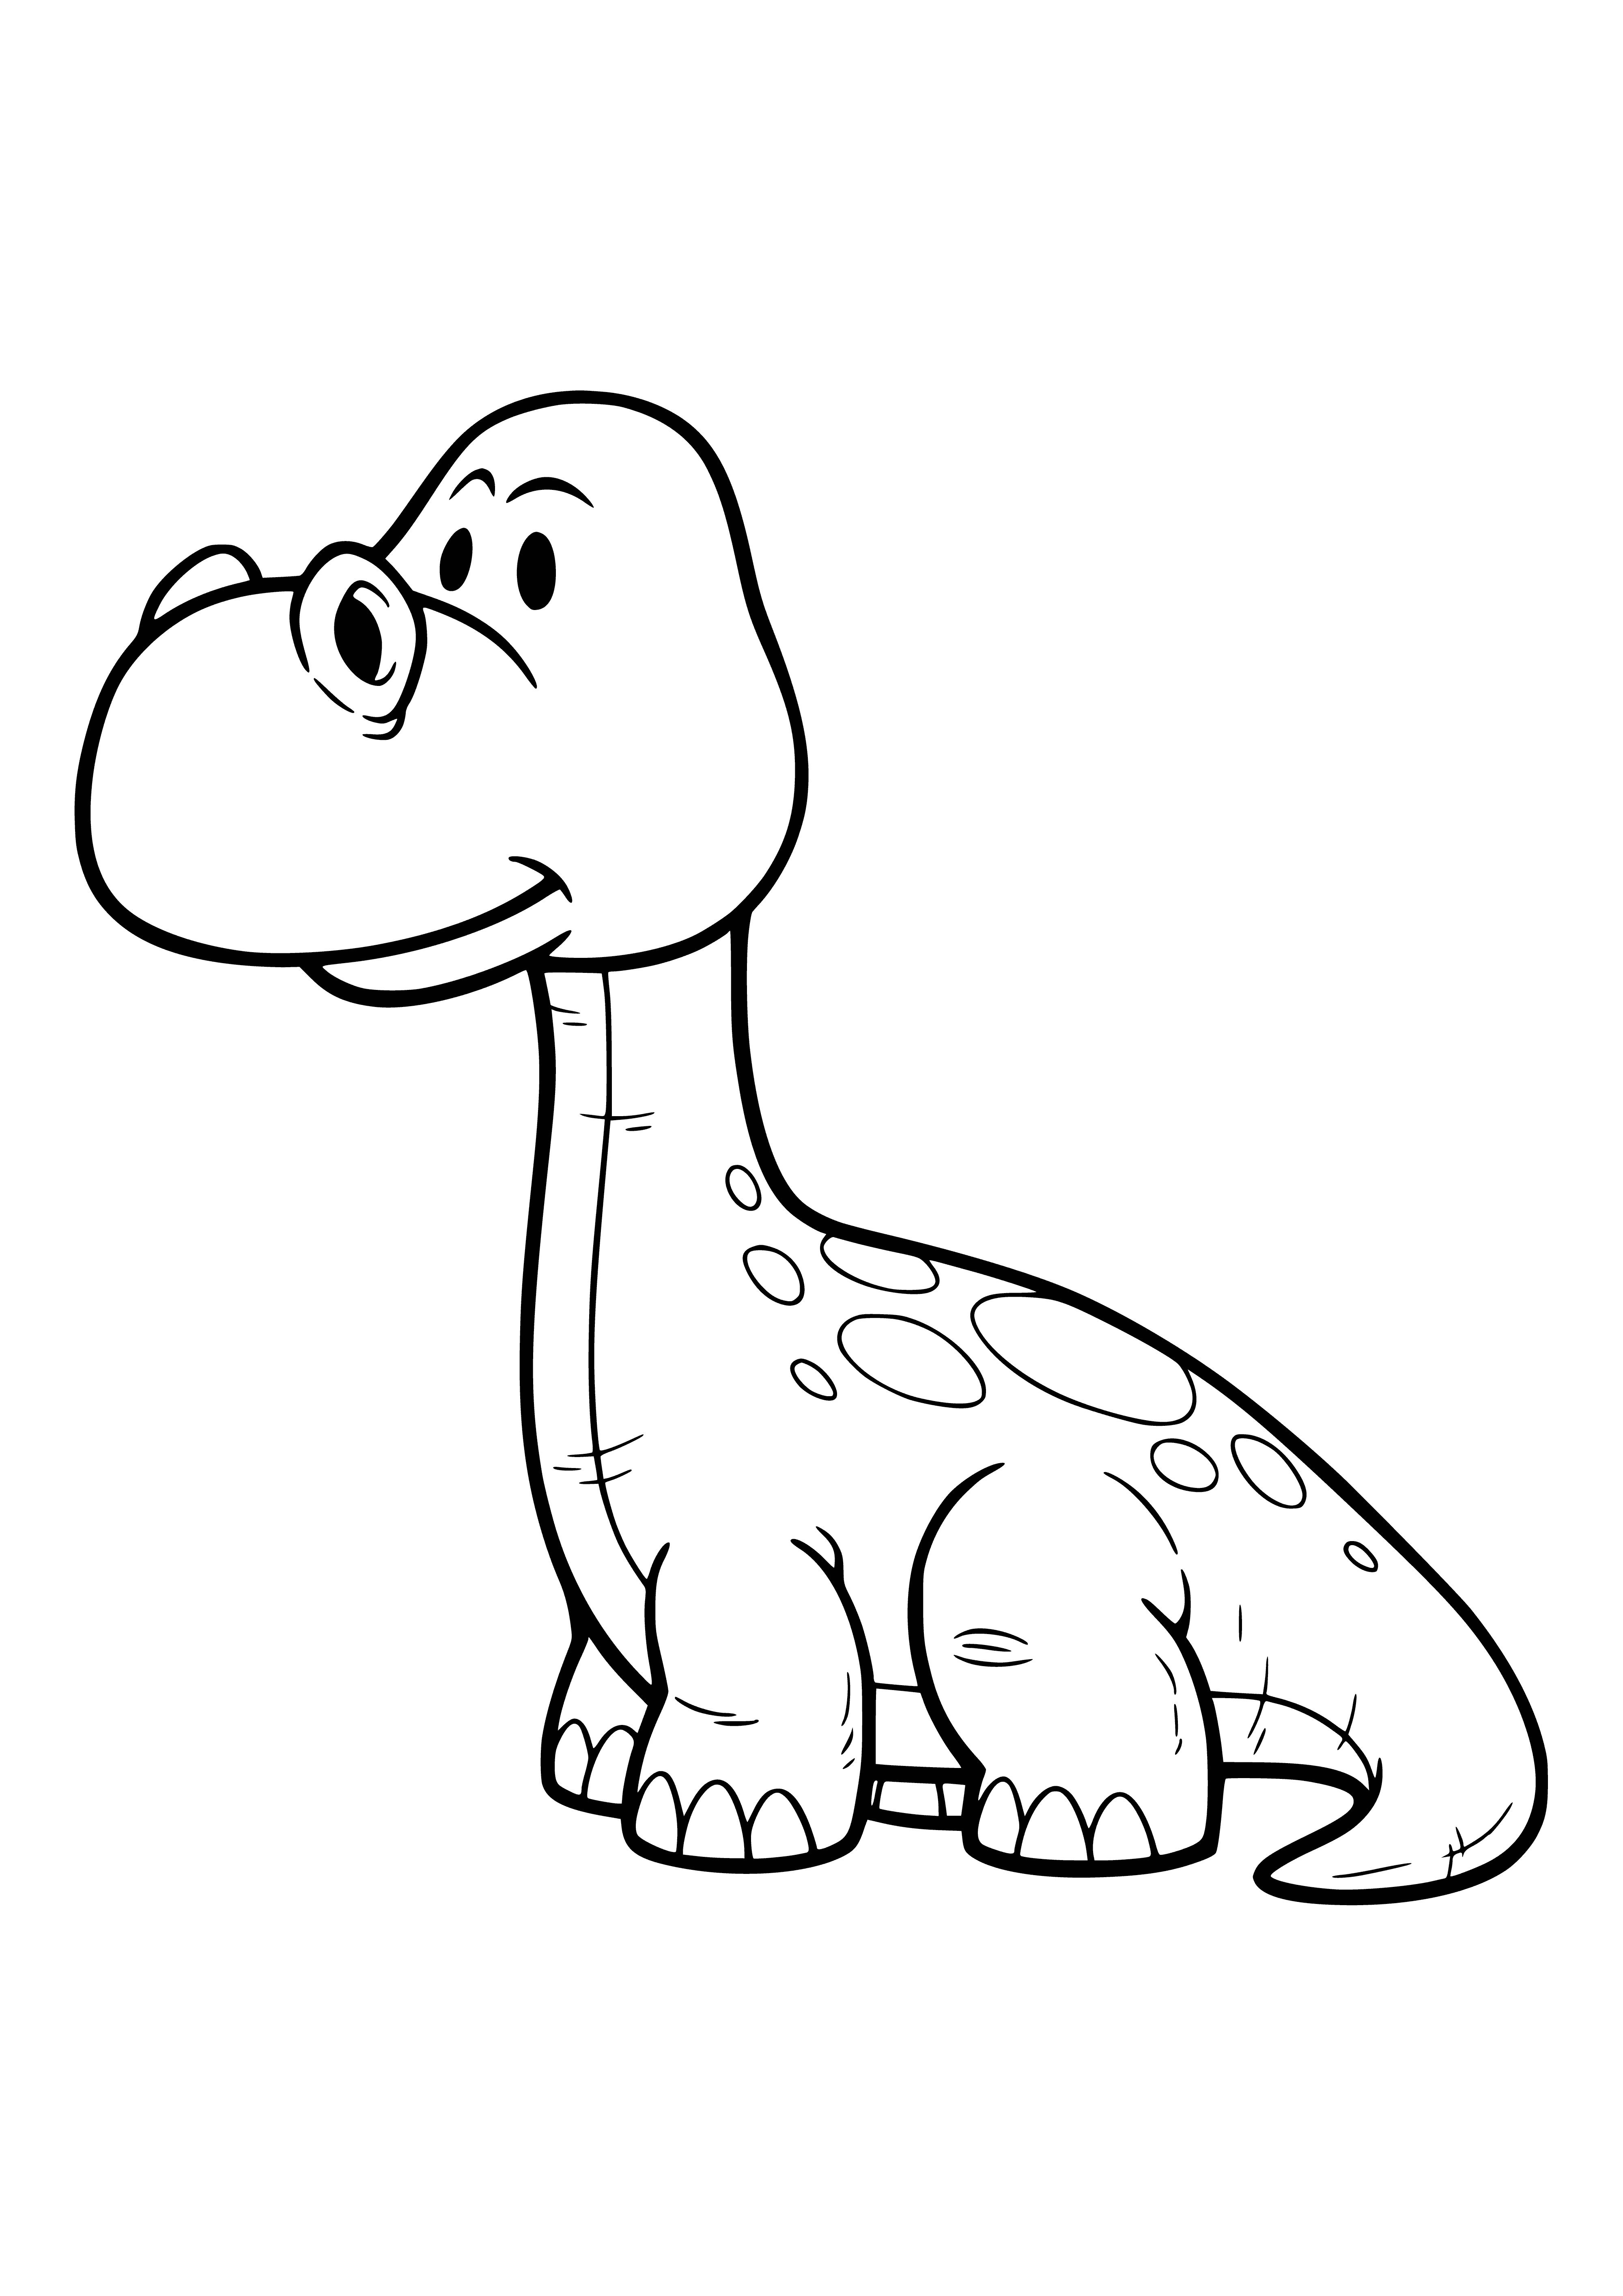 Childhood apatosaurus coloring page